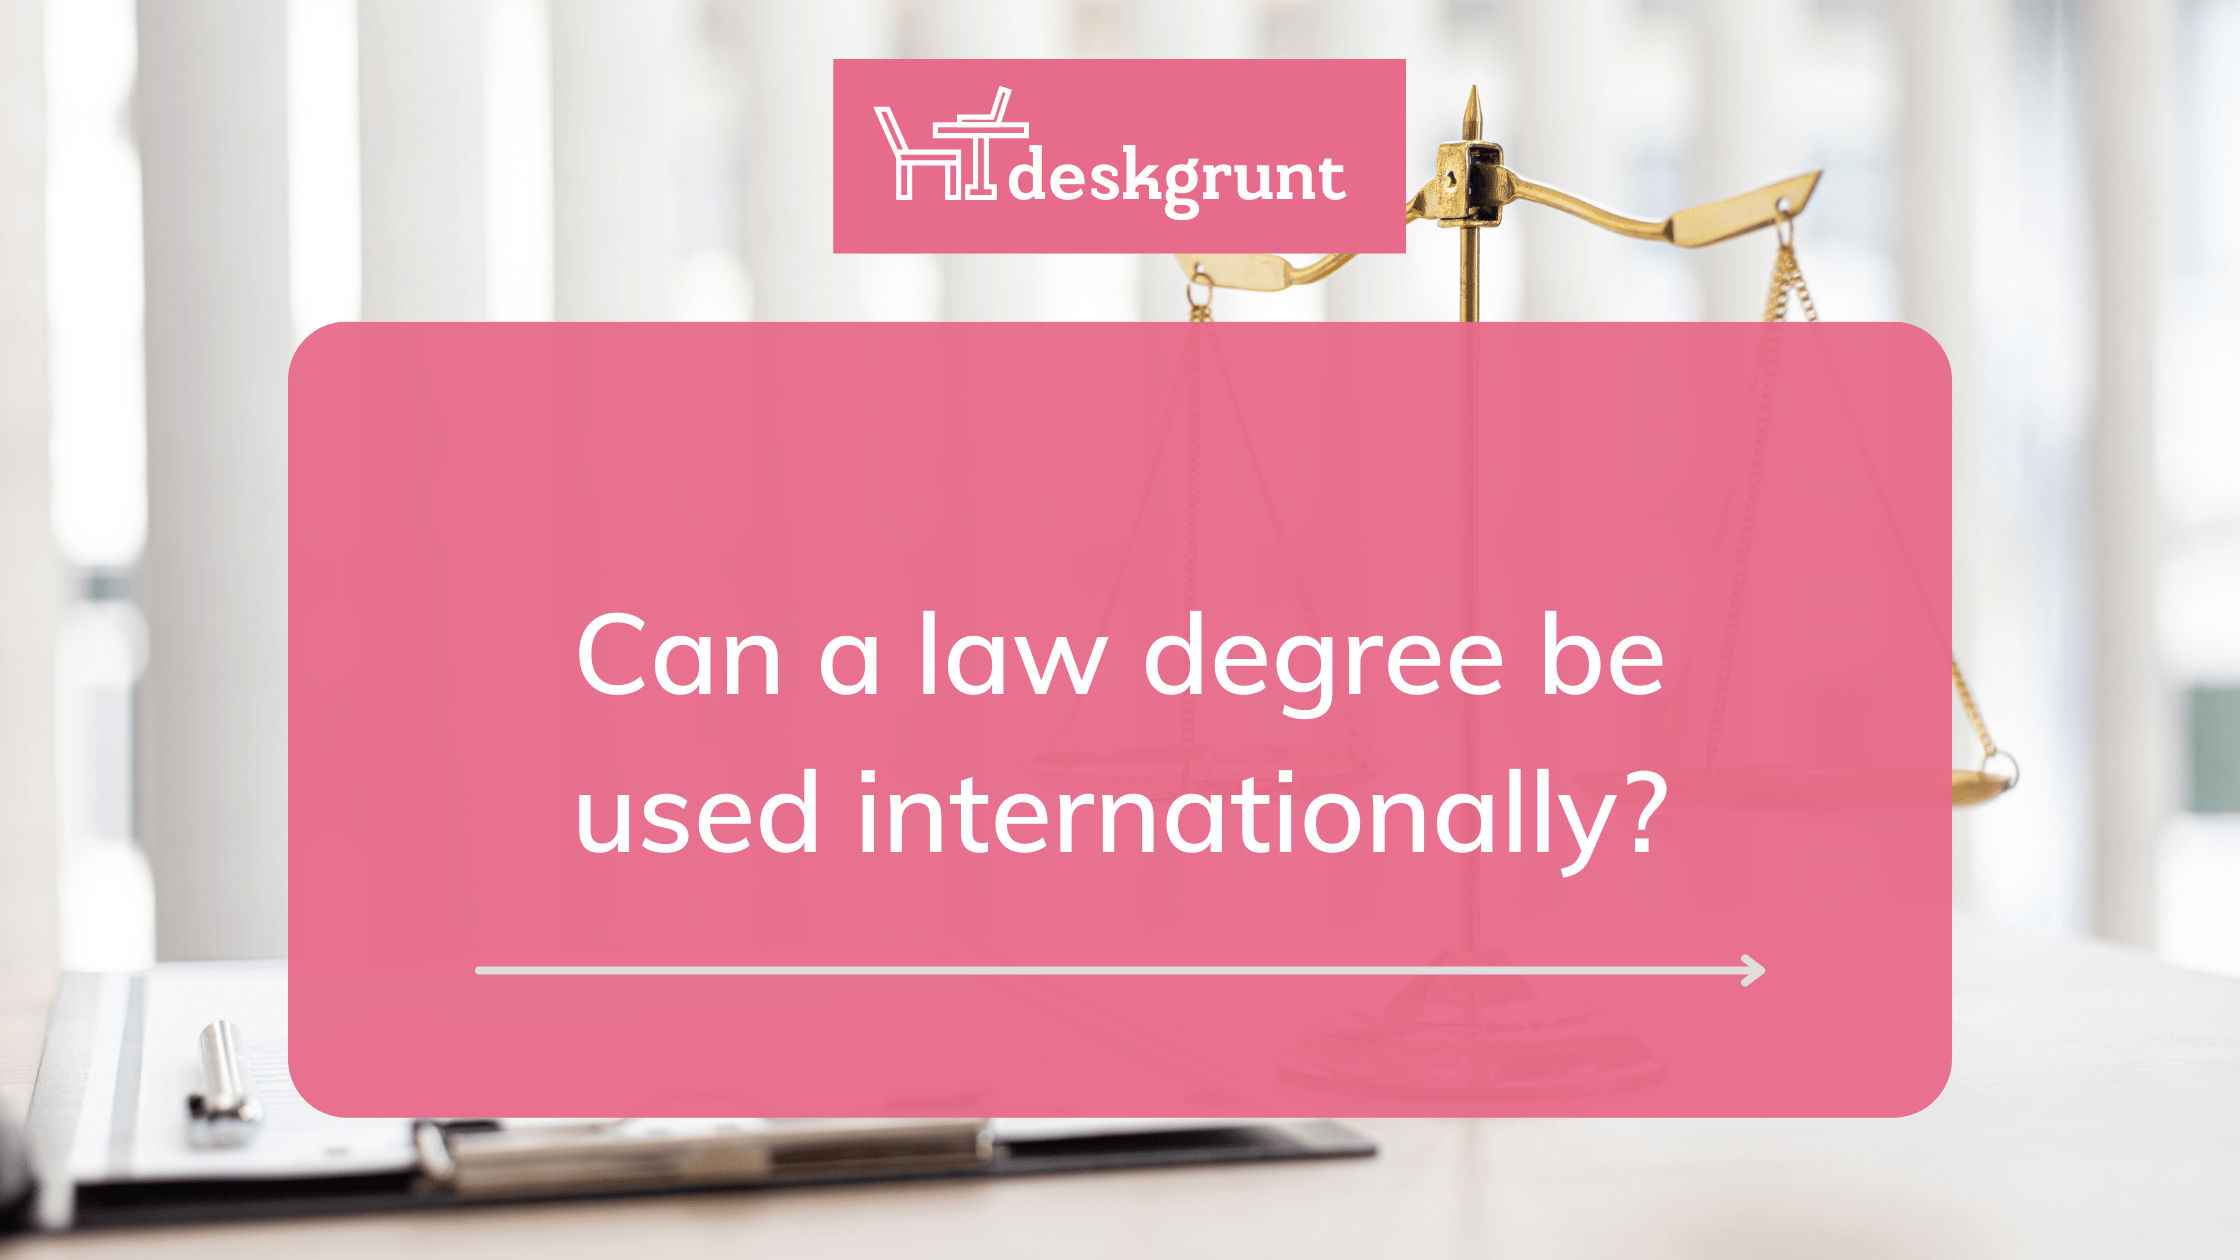 Can a law degree be used internationally